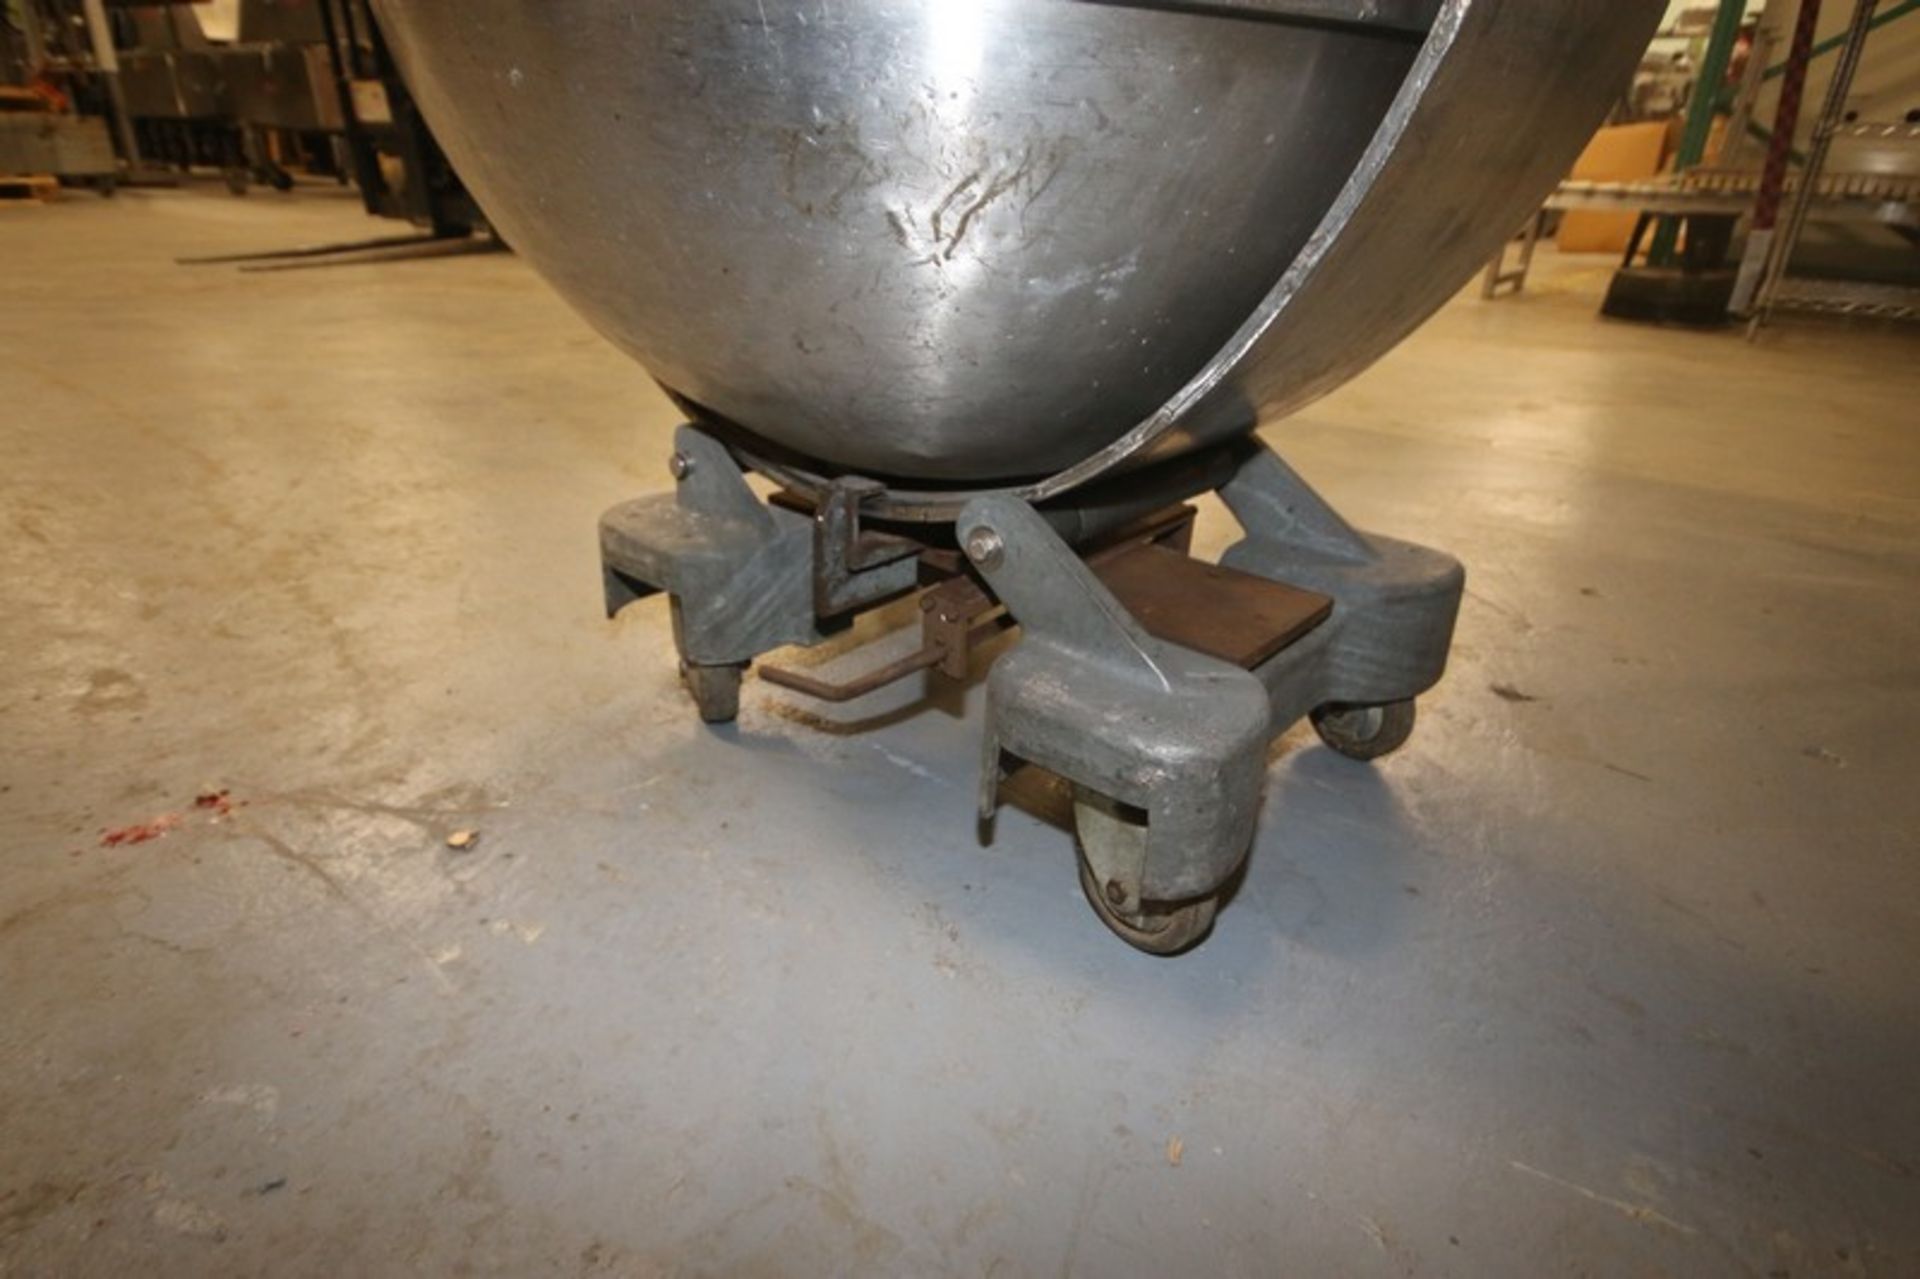 S/S Mixing Bowl, Internal Dims.:  Aprox. 32-1/2" Dia. x 26-1/2" Deep, Mounted on Portable Cart ( - Image 7 of 8